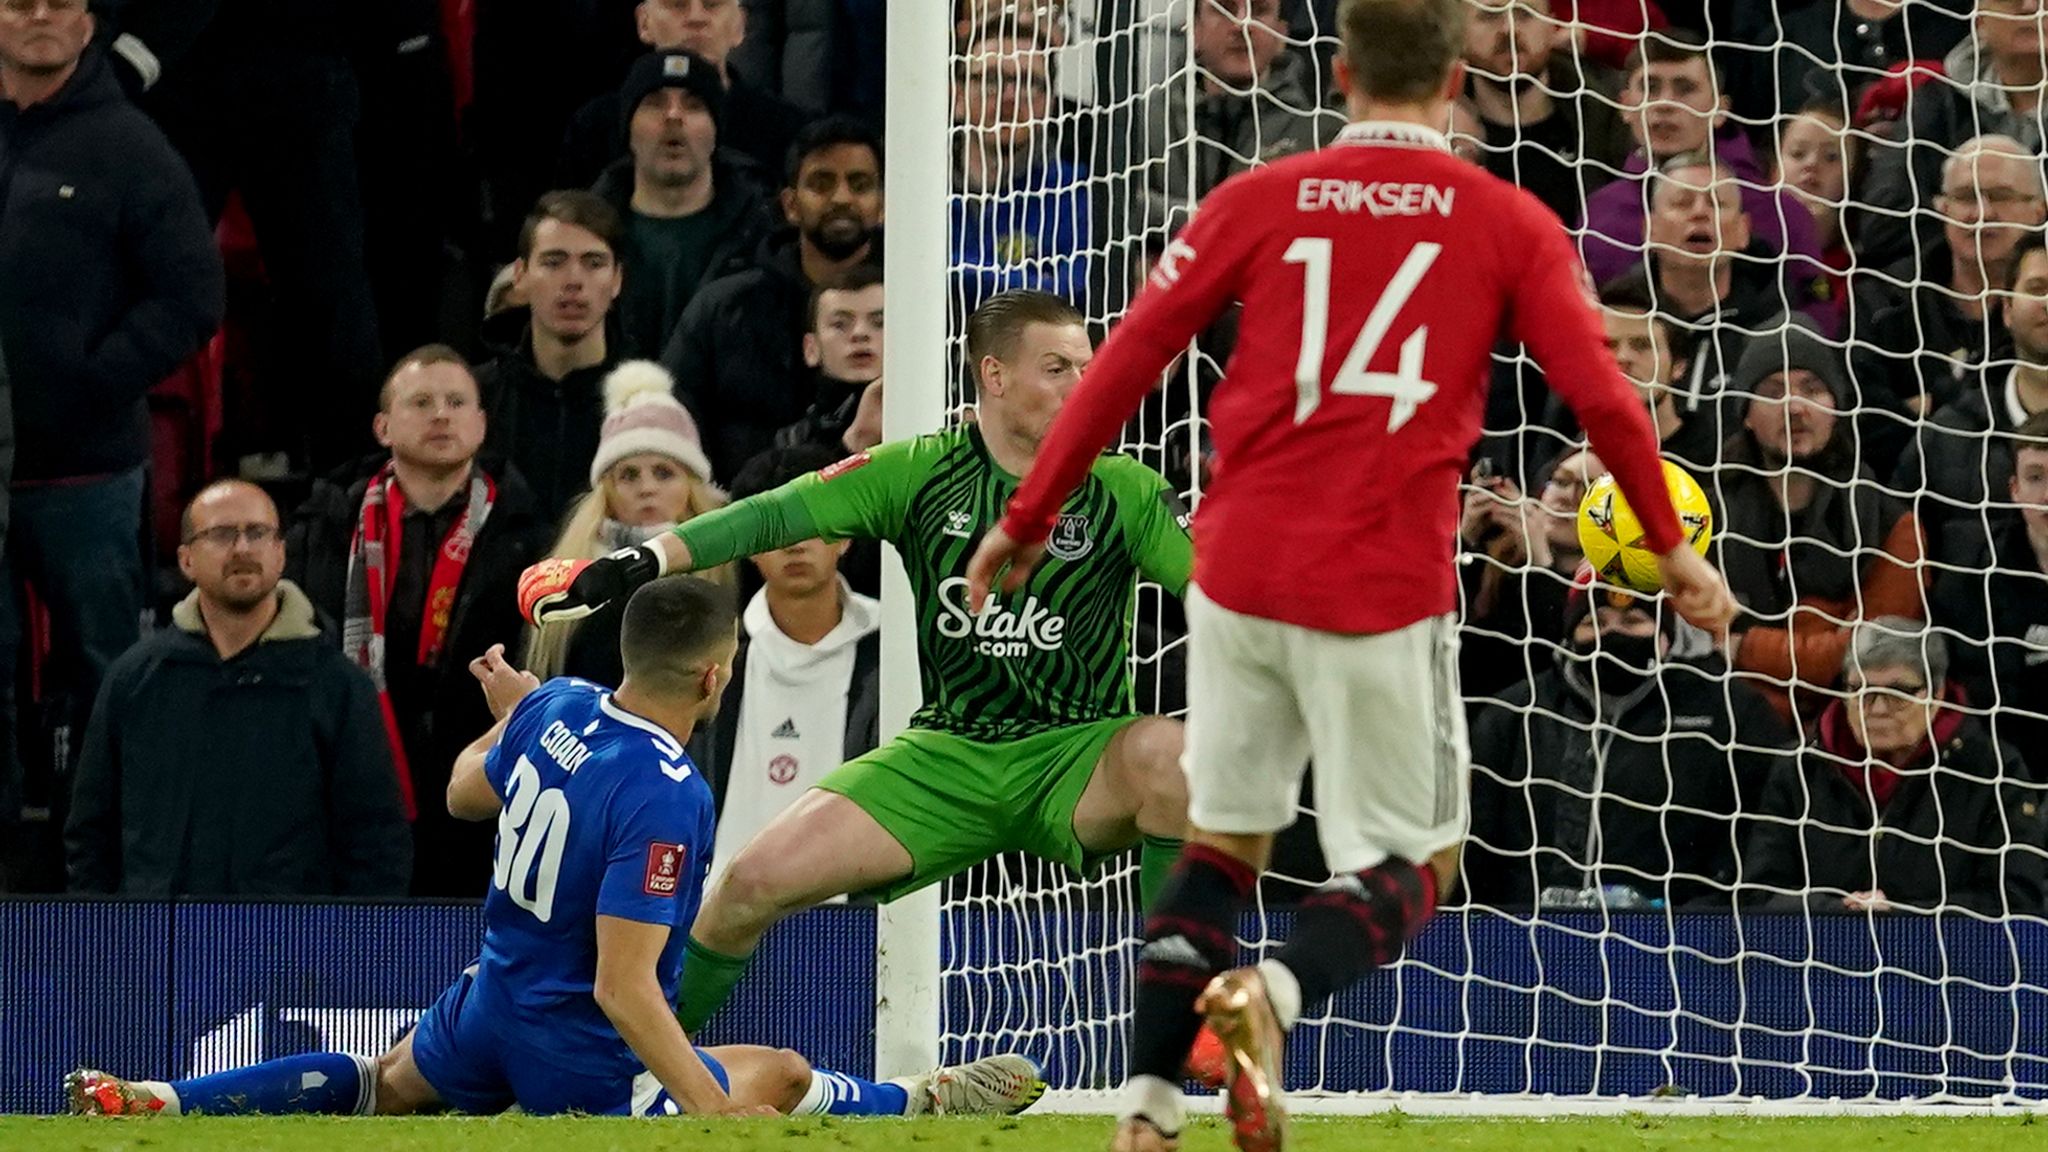 Man Utd 3-1 Everton Conor Coady own goal gifts FA Cup win to United as Frank Lampards struggles continue Football News Sky Sports